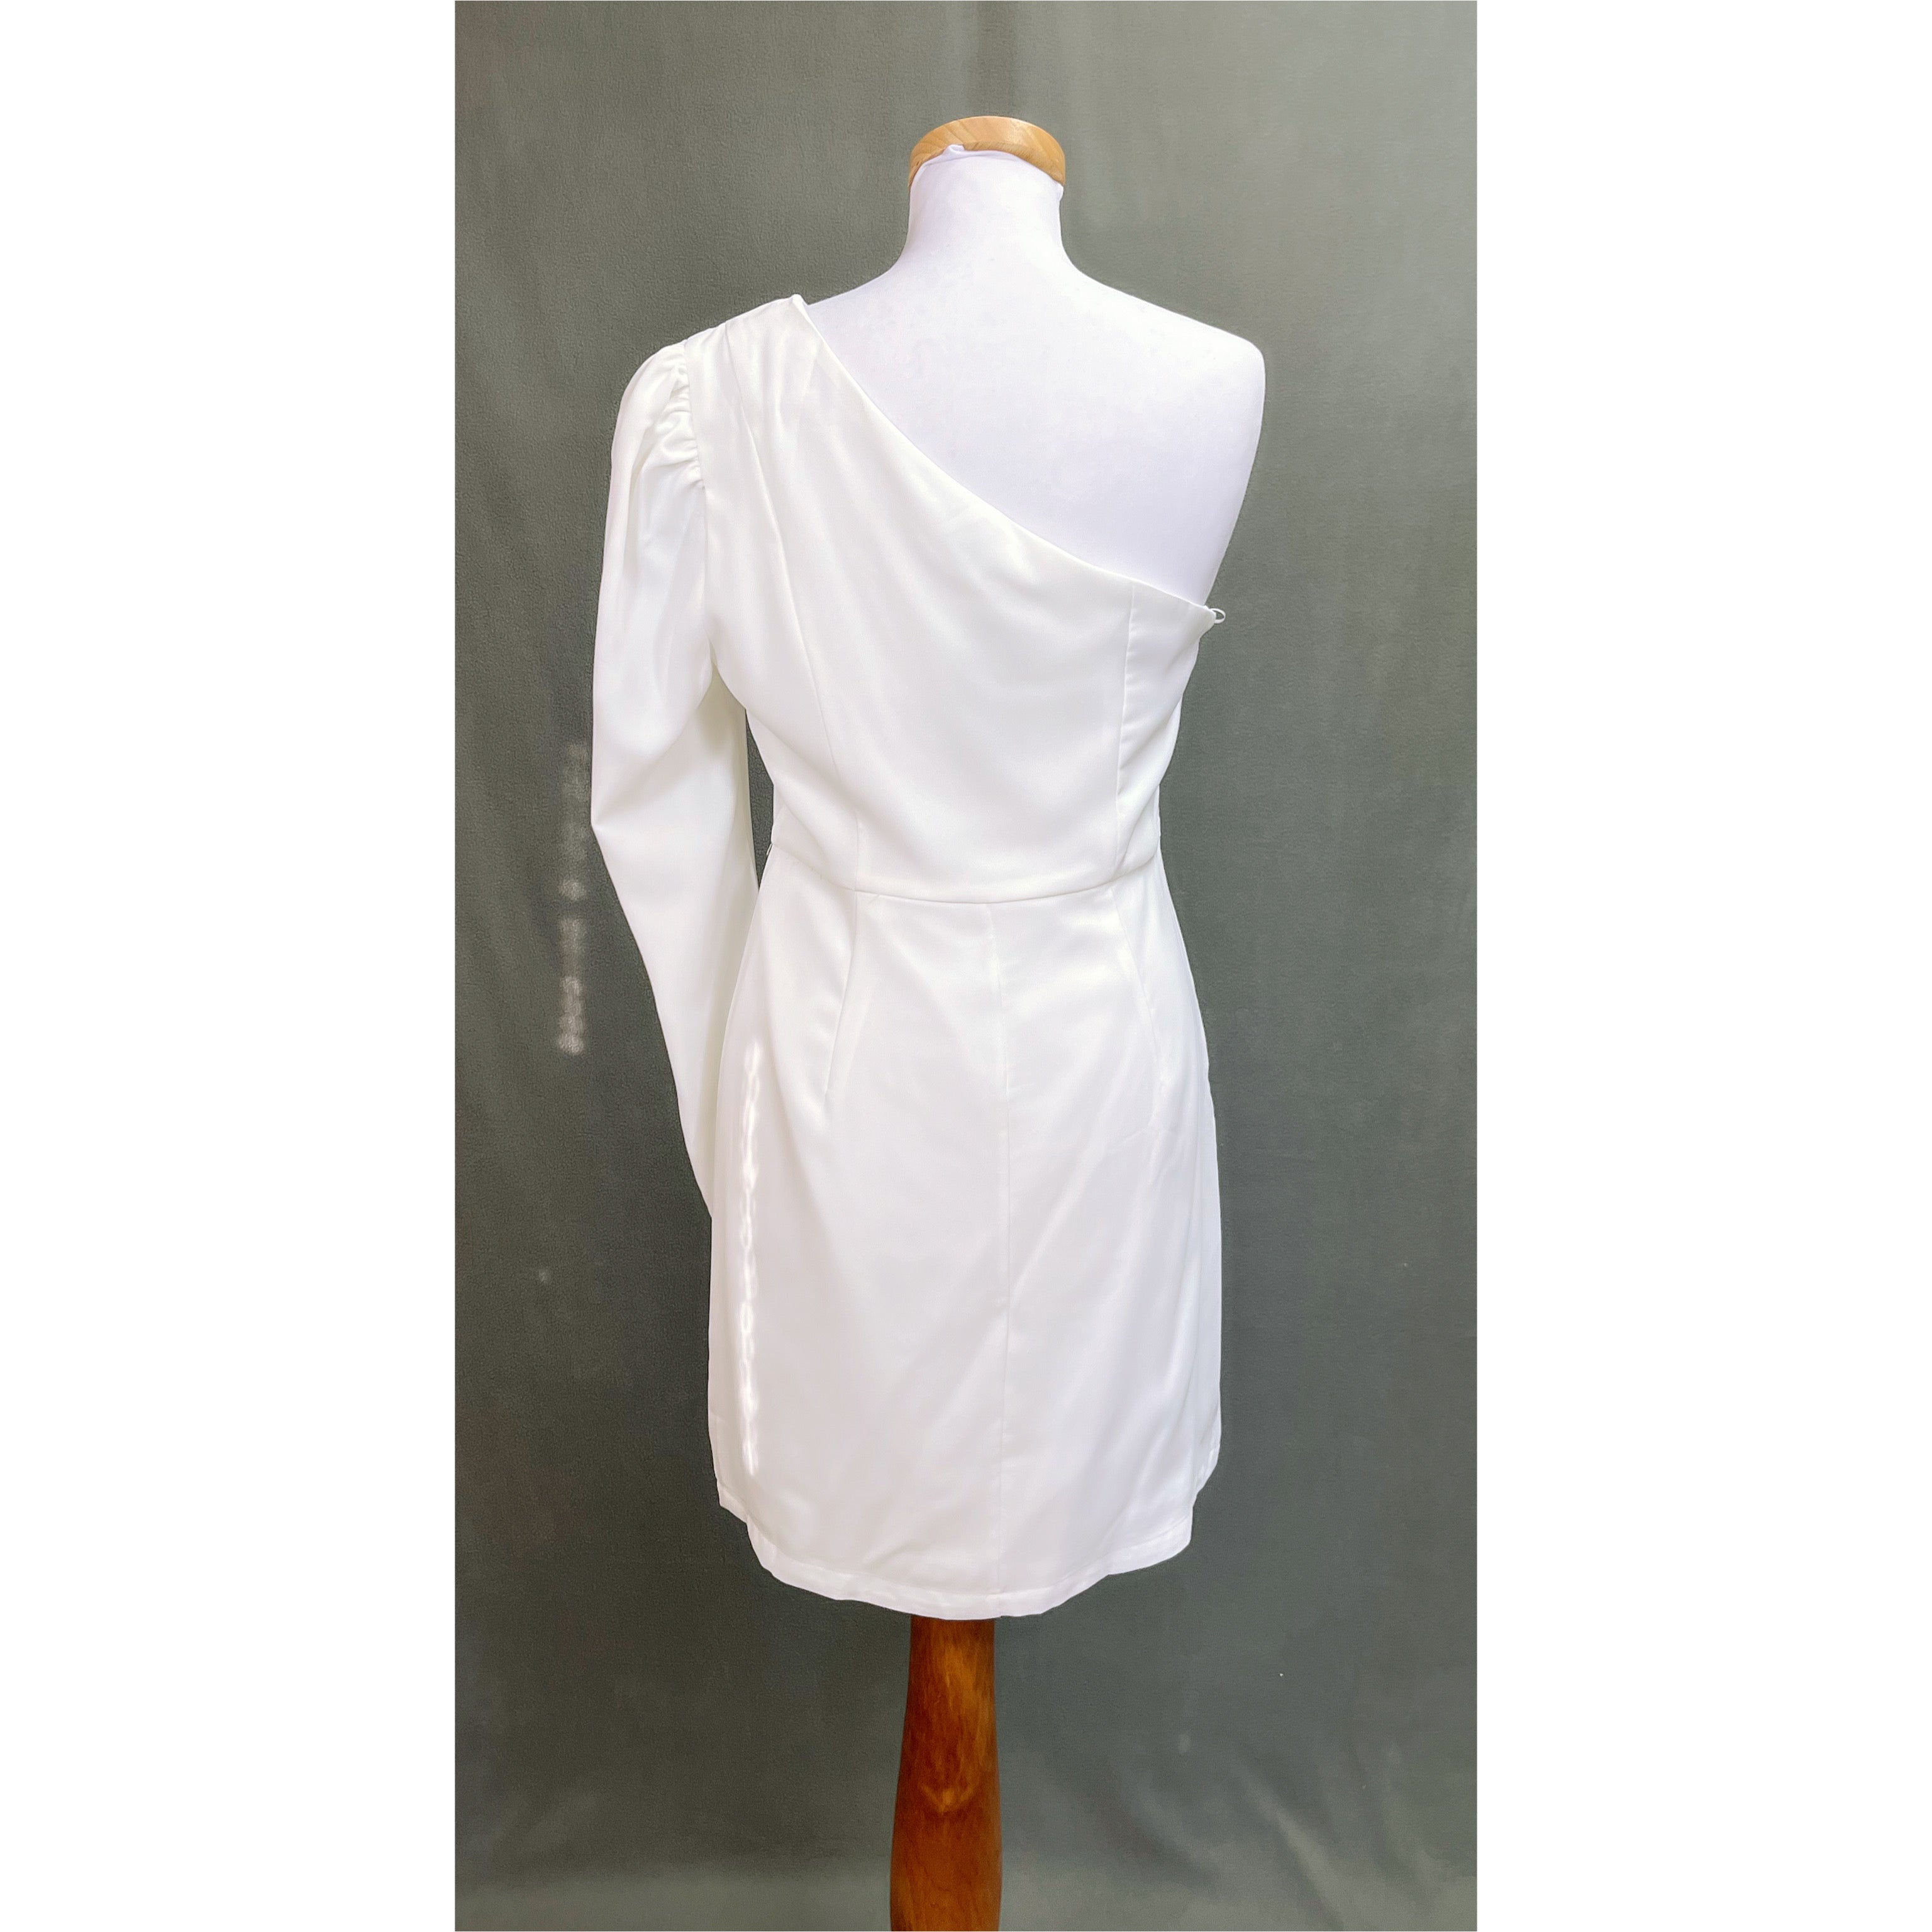 TCEC white one-sleeve dress, sizes M & L, NEW WITH TAGS!